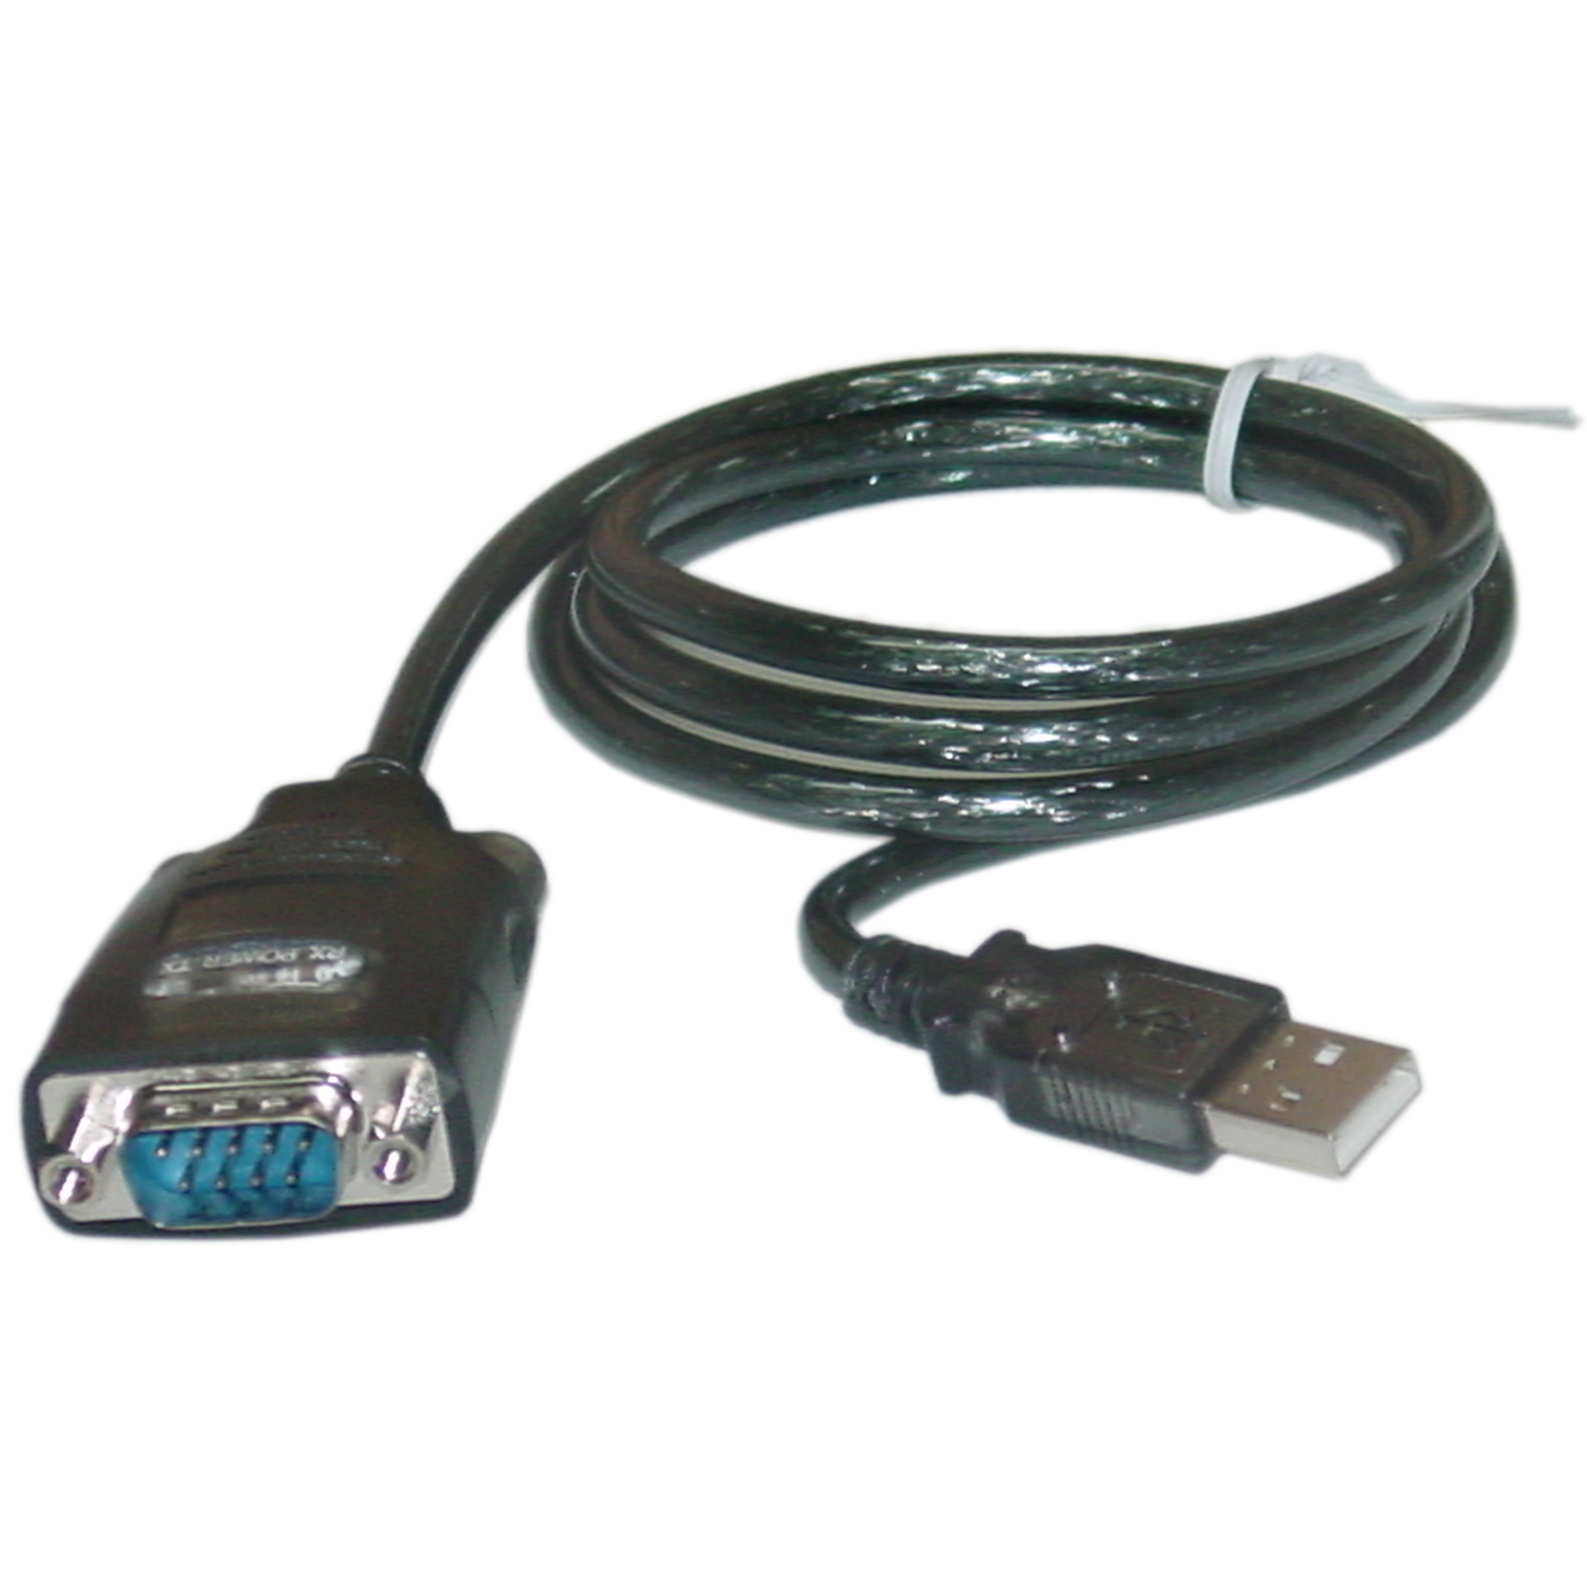 Usb to serial adapter for macbook pro